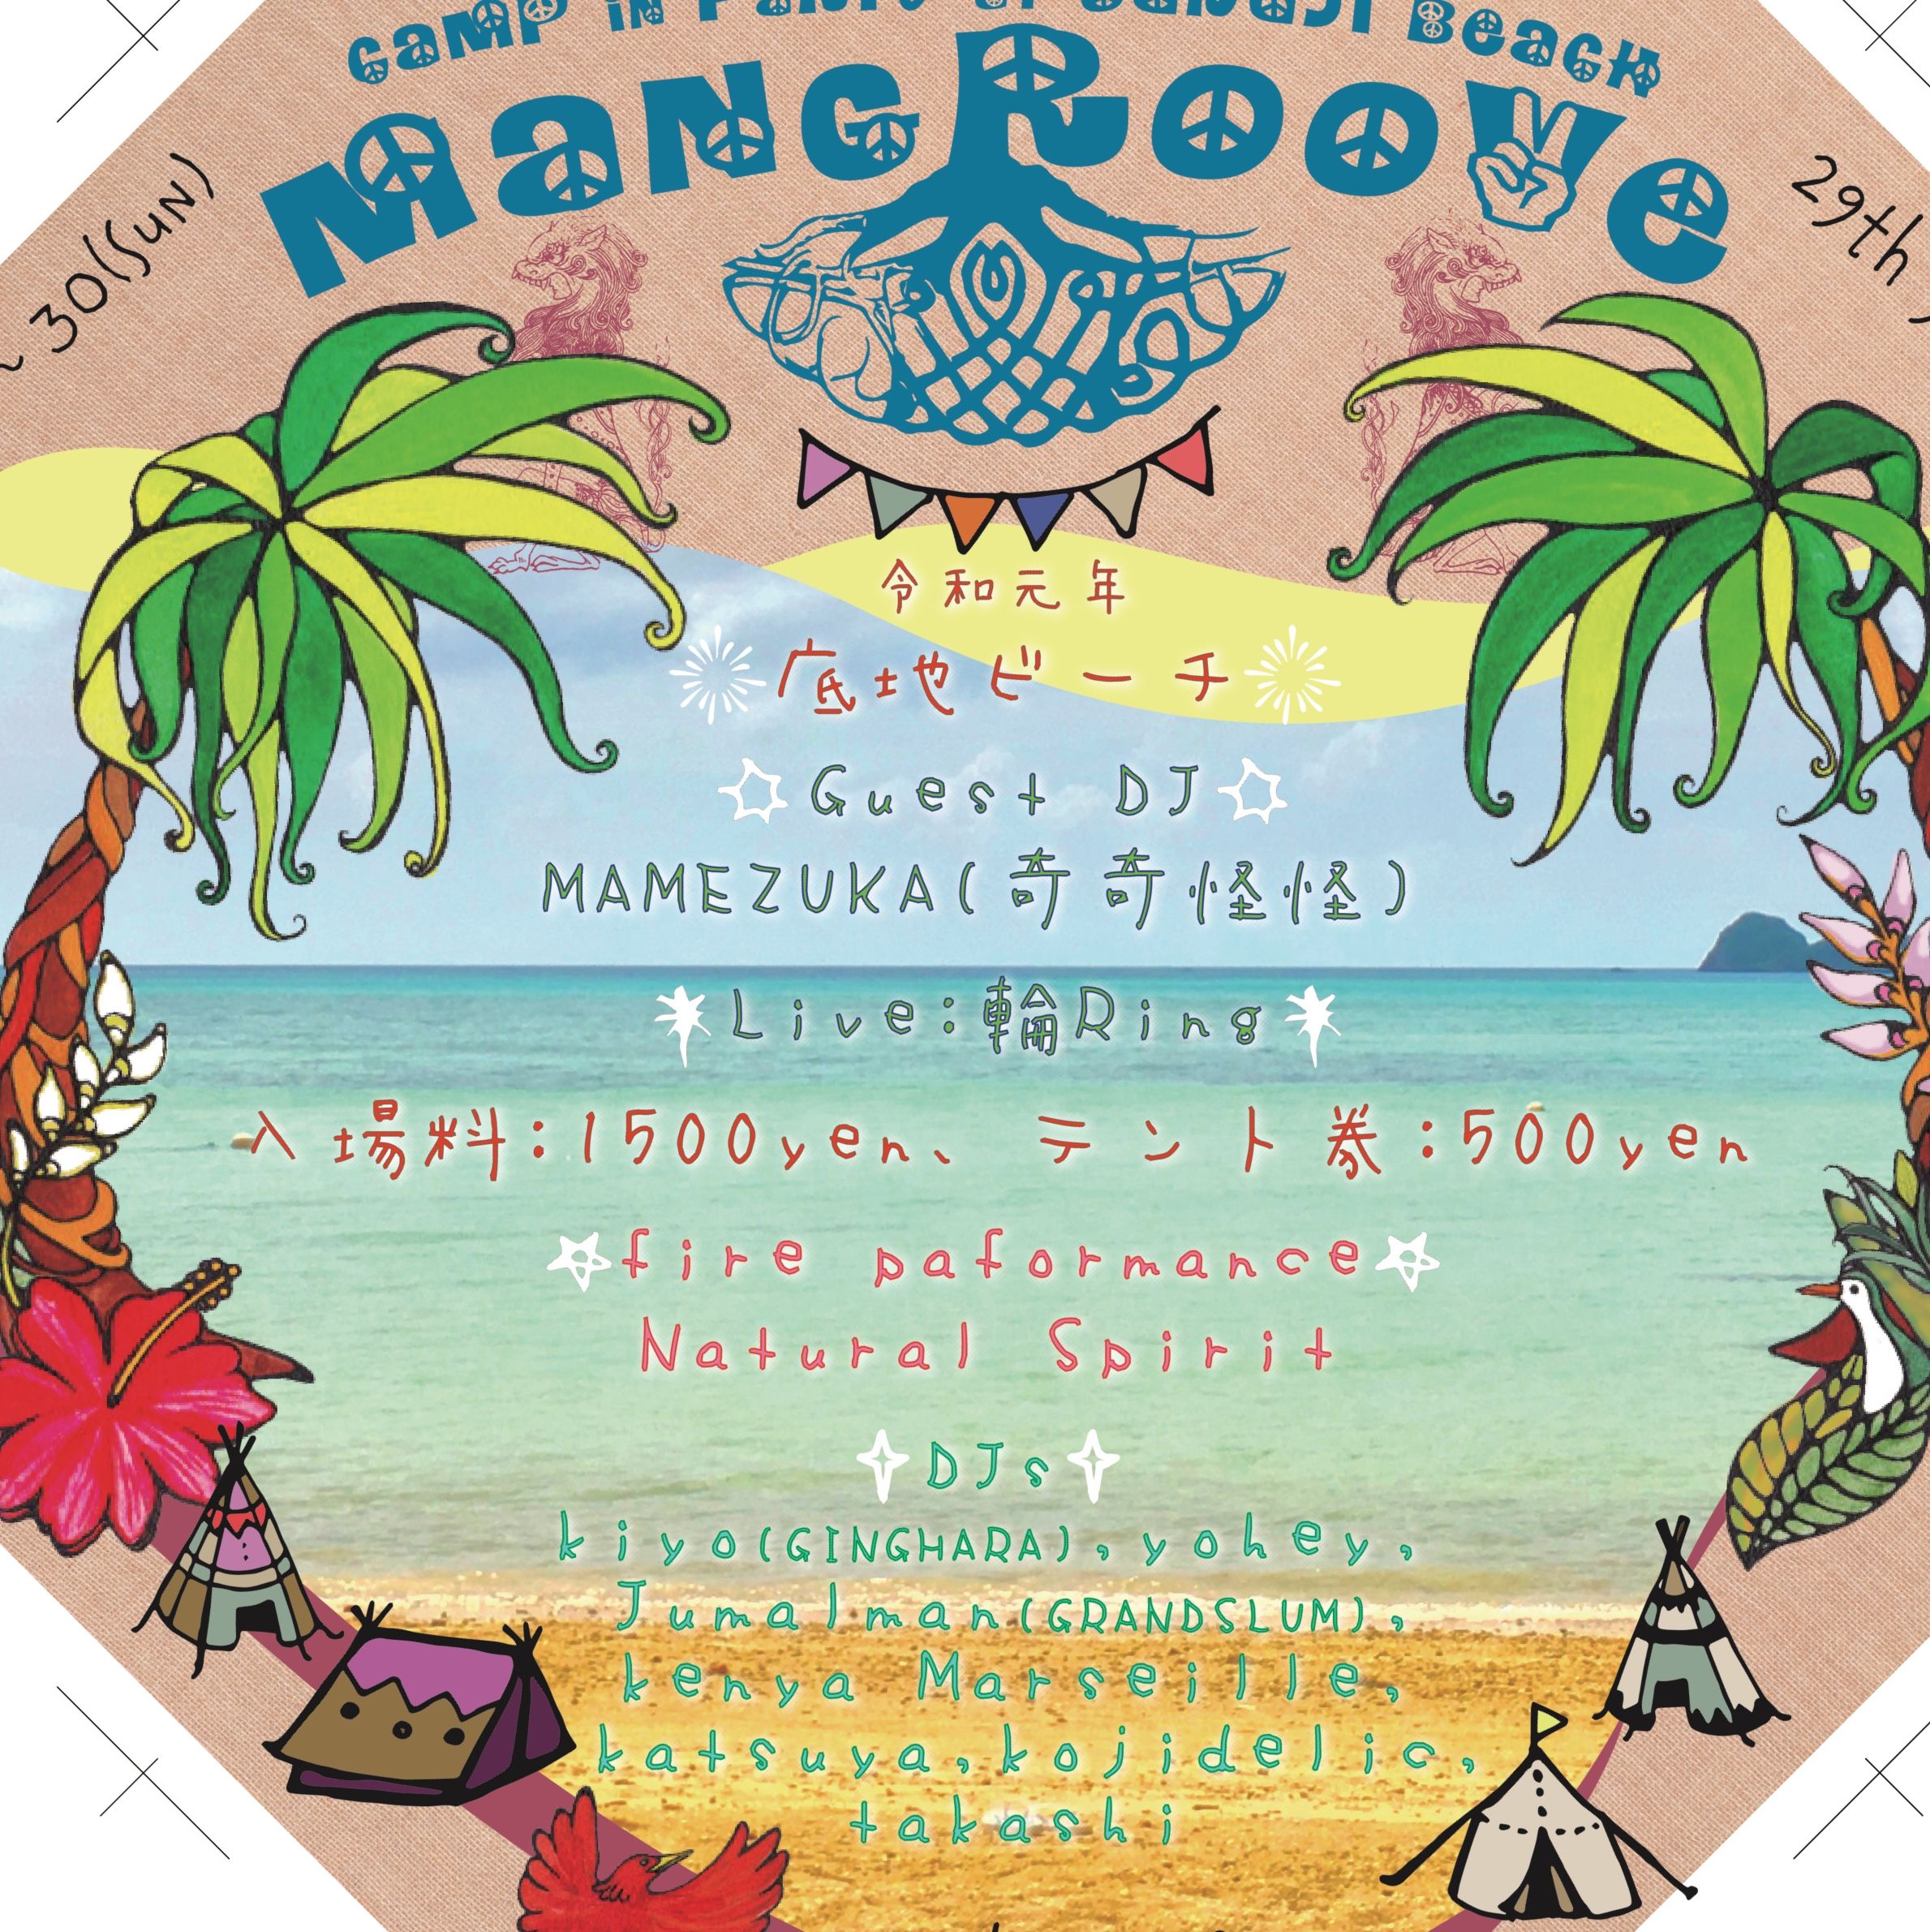 camp in party at sukuji beach "MANGROOVE"